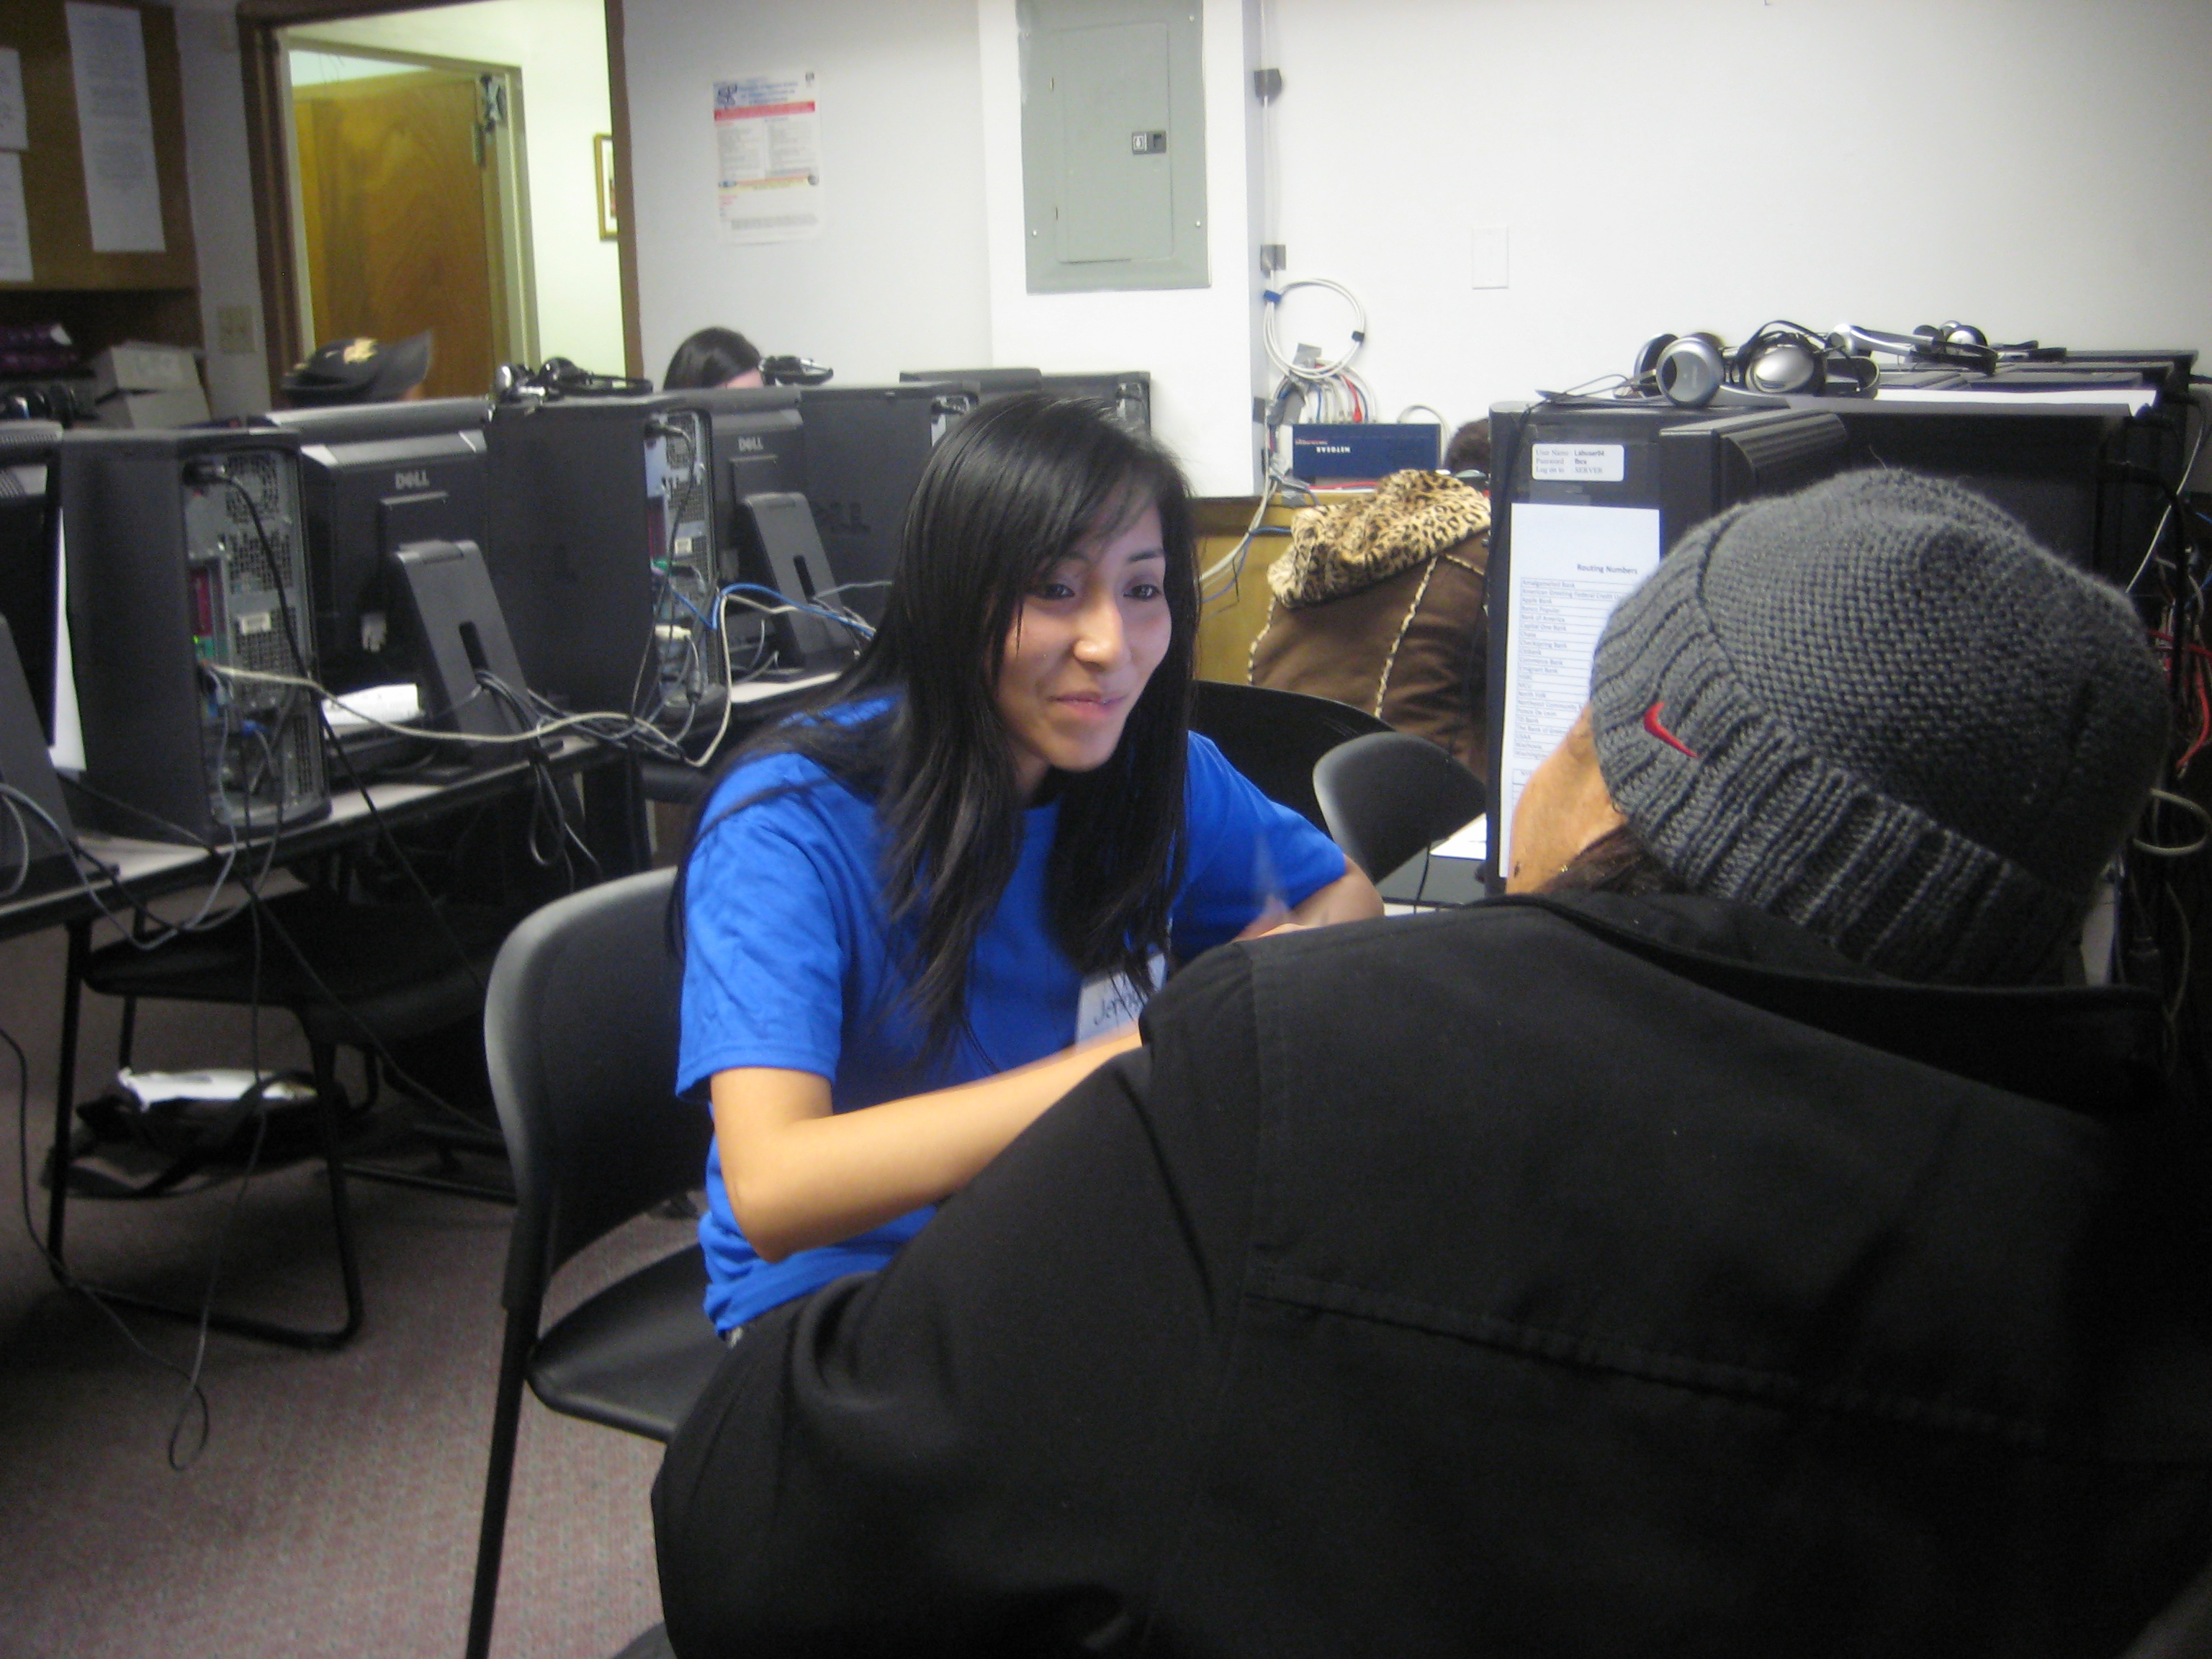 A UNHP tax volunteer explains the tax preparation process to a client.